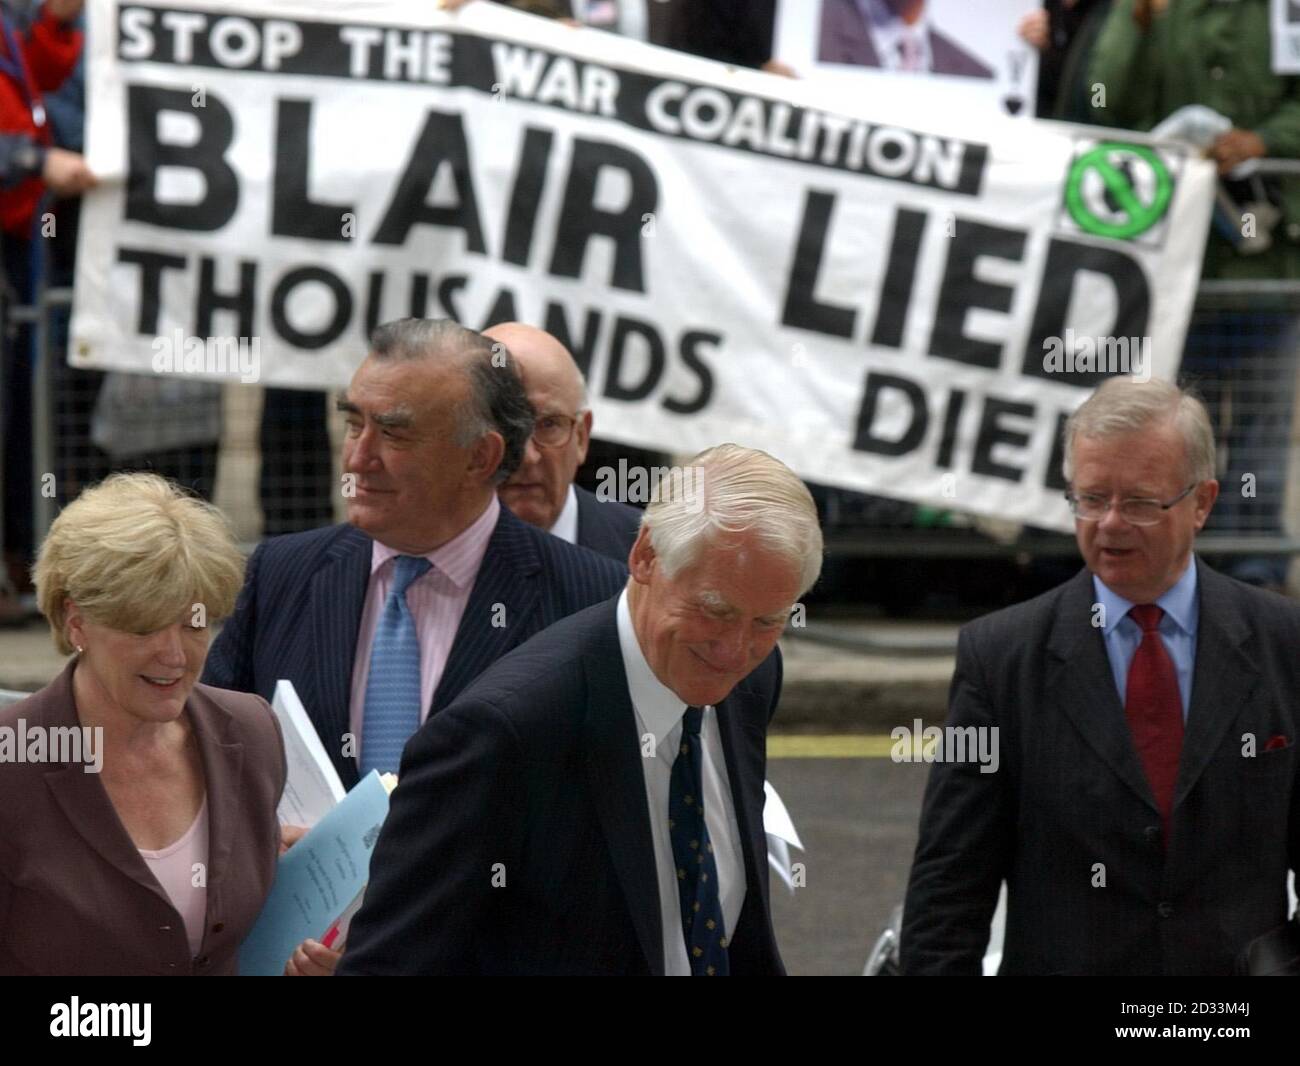 Lord Butler (centre) and his team, from left, Ann Taylor, Michael Mates, Lord Inge and Sir John Chilcott arrive for a news conference in Westminster, central London, following the publication of his report into intelligence failings in the run-up to war in Iraq. He was commissioned in February to look into the gap between the intelligence community's pre-war claims that Iraqi dictator Saddam Hussein had illicit arsenals of weapons of mass destruction and the failure of the Iraq Survey Group to find any trace of such stockpiles. Stock Photo